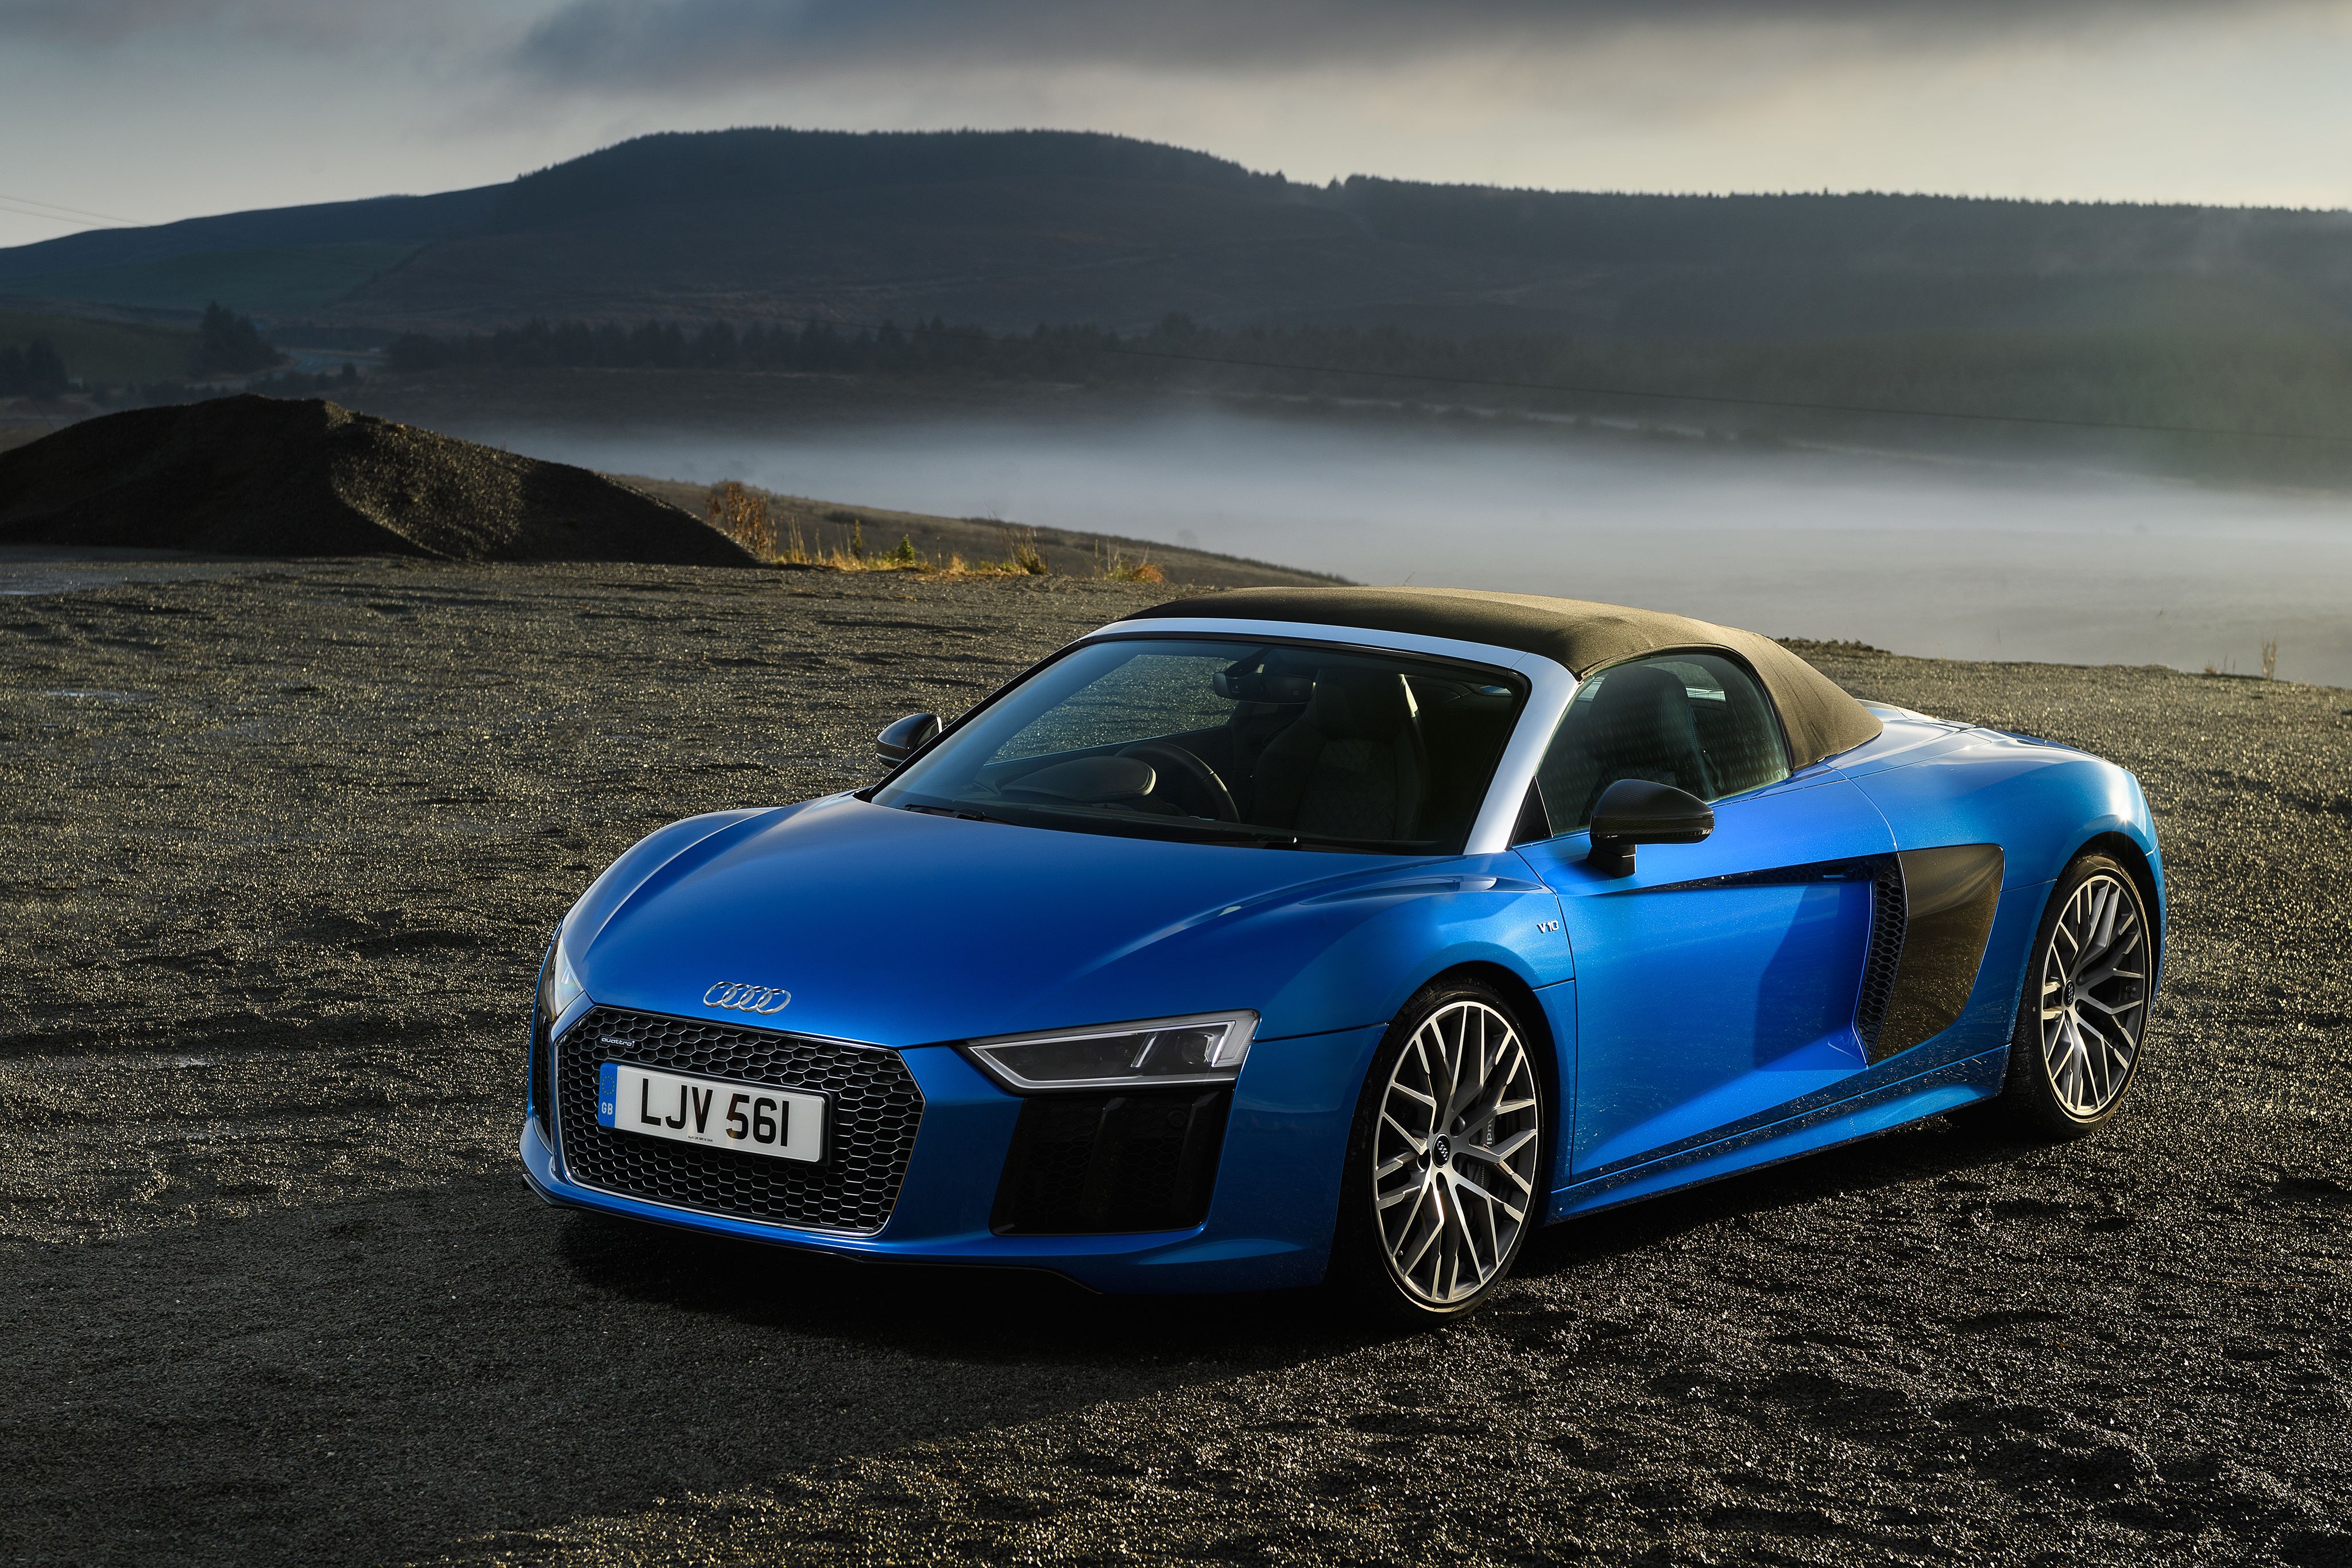 57 Audi R8 Front 4k Wallpapers Hd 4k 5k For Pc And Mobile Download Free Images For Iphone Android